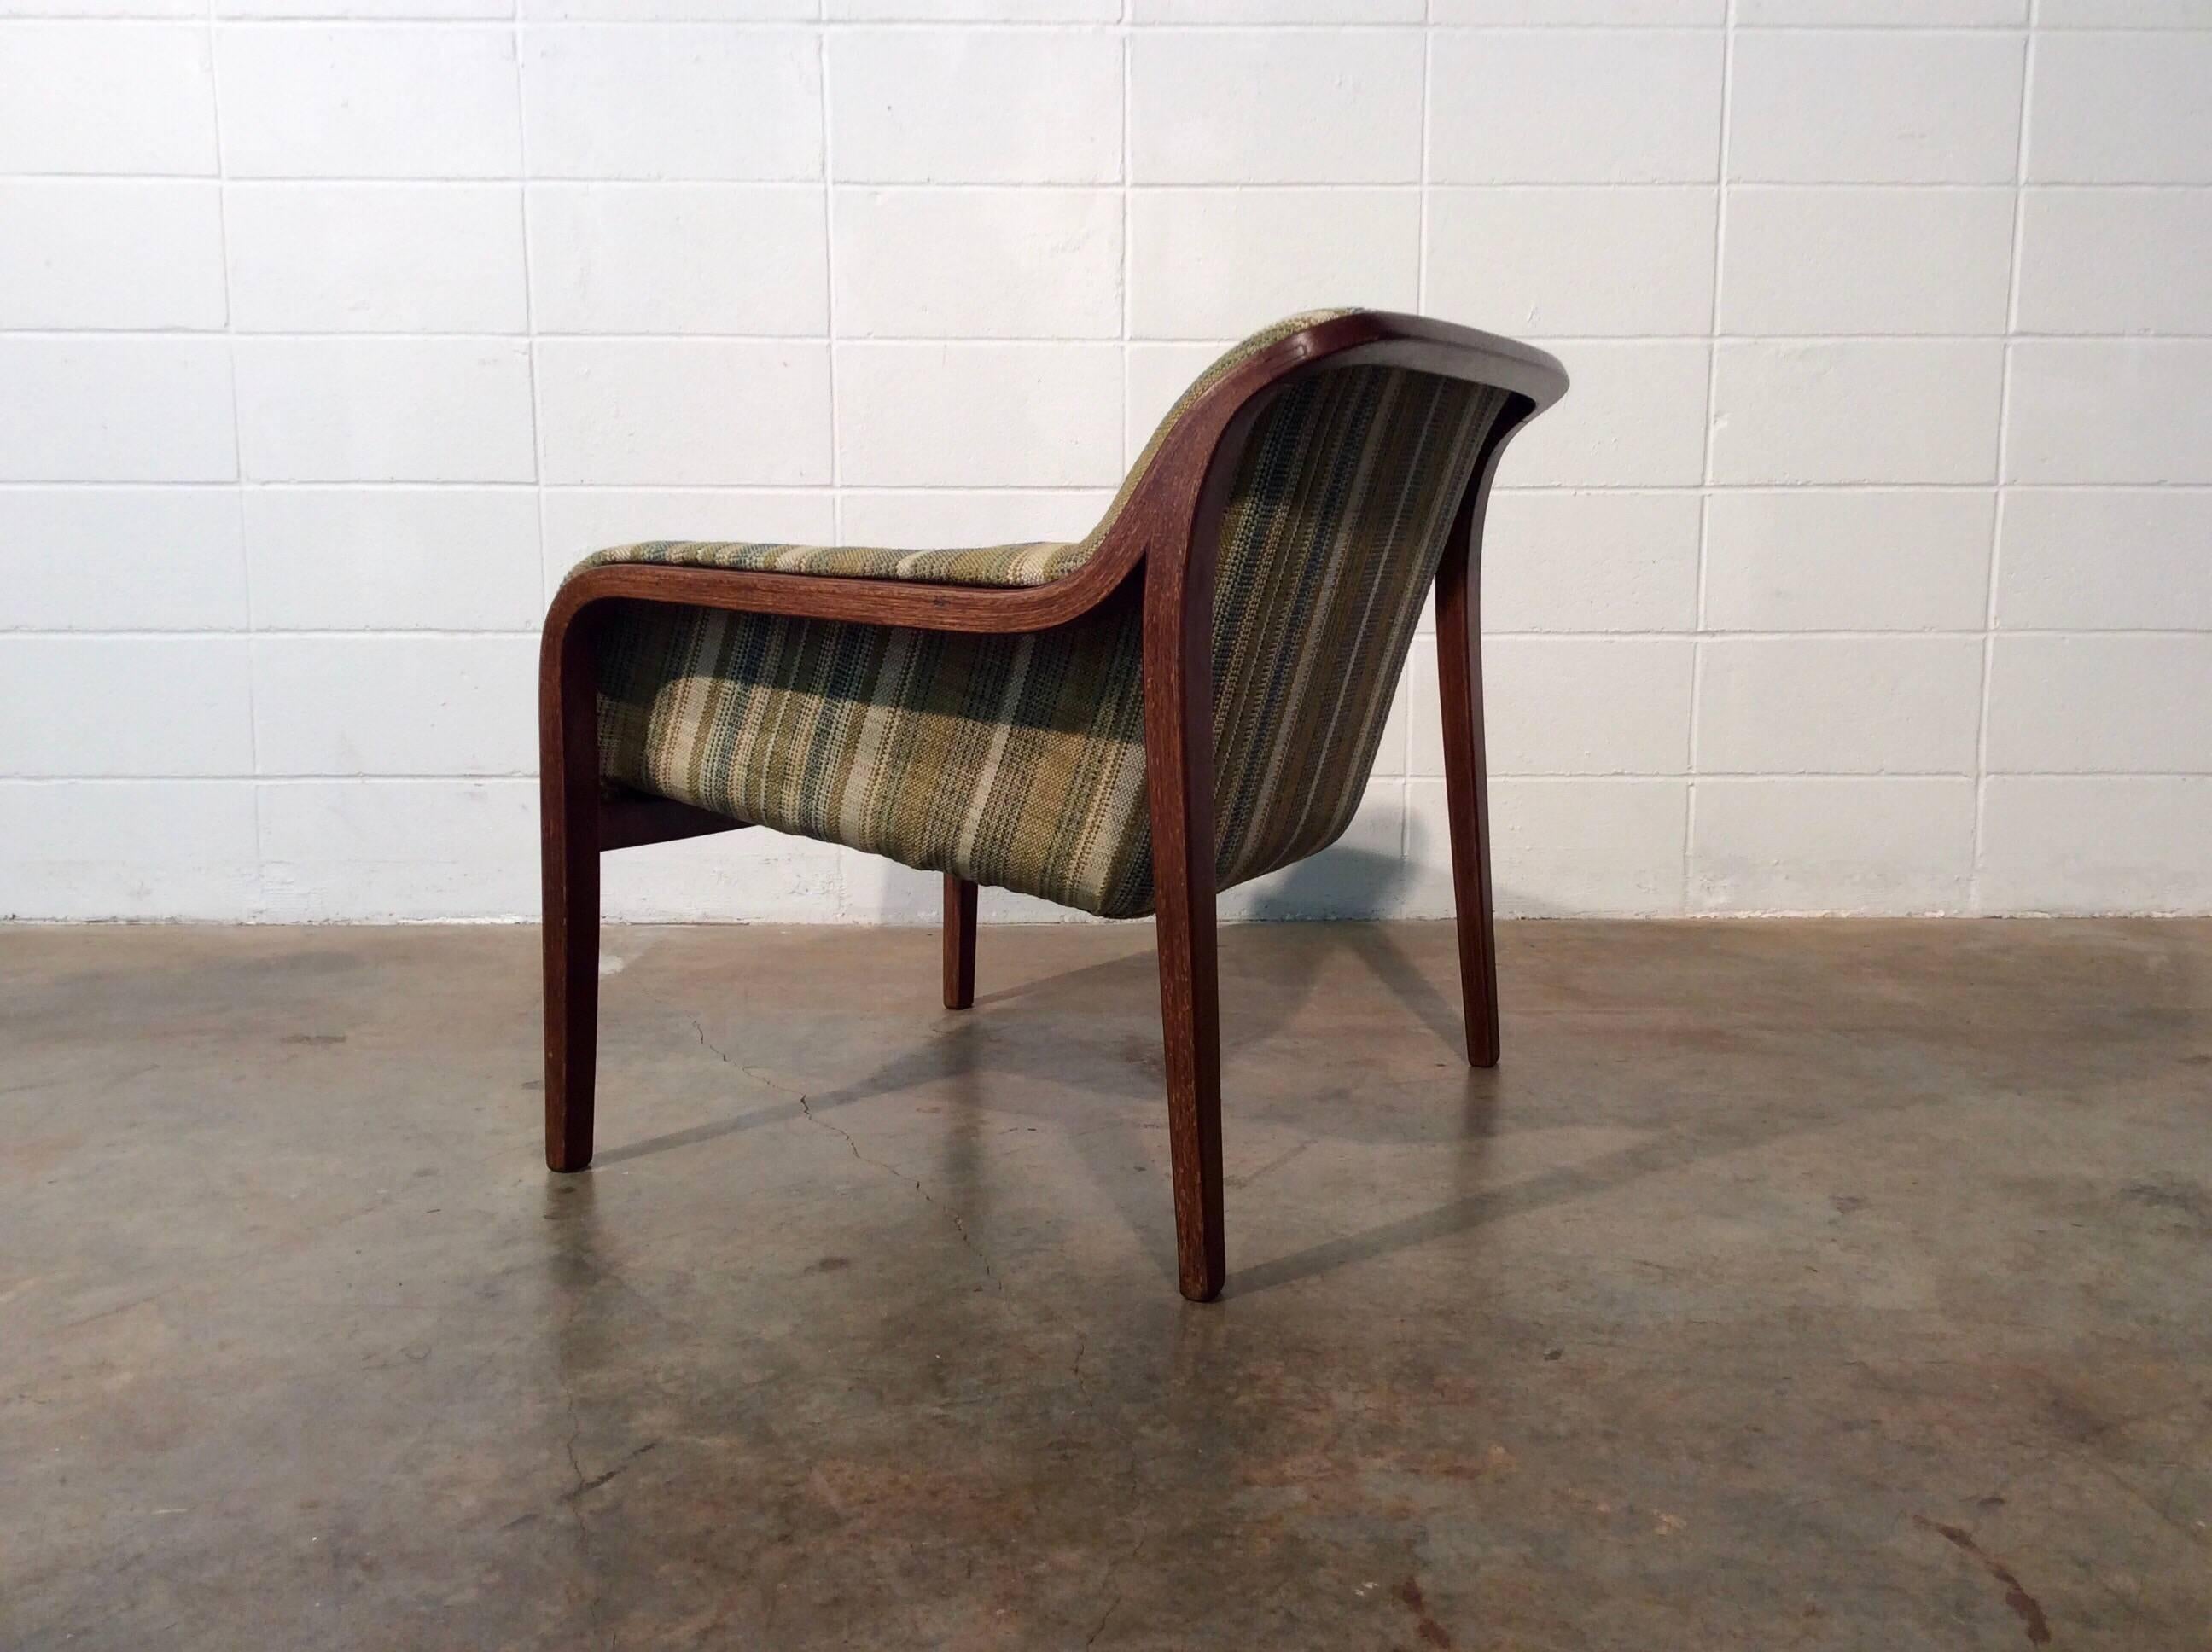 Restored Mid-Century Modern Bent Wood Lounge Chair, Bill Stephens for Knoll 2